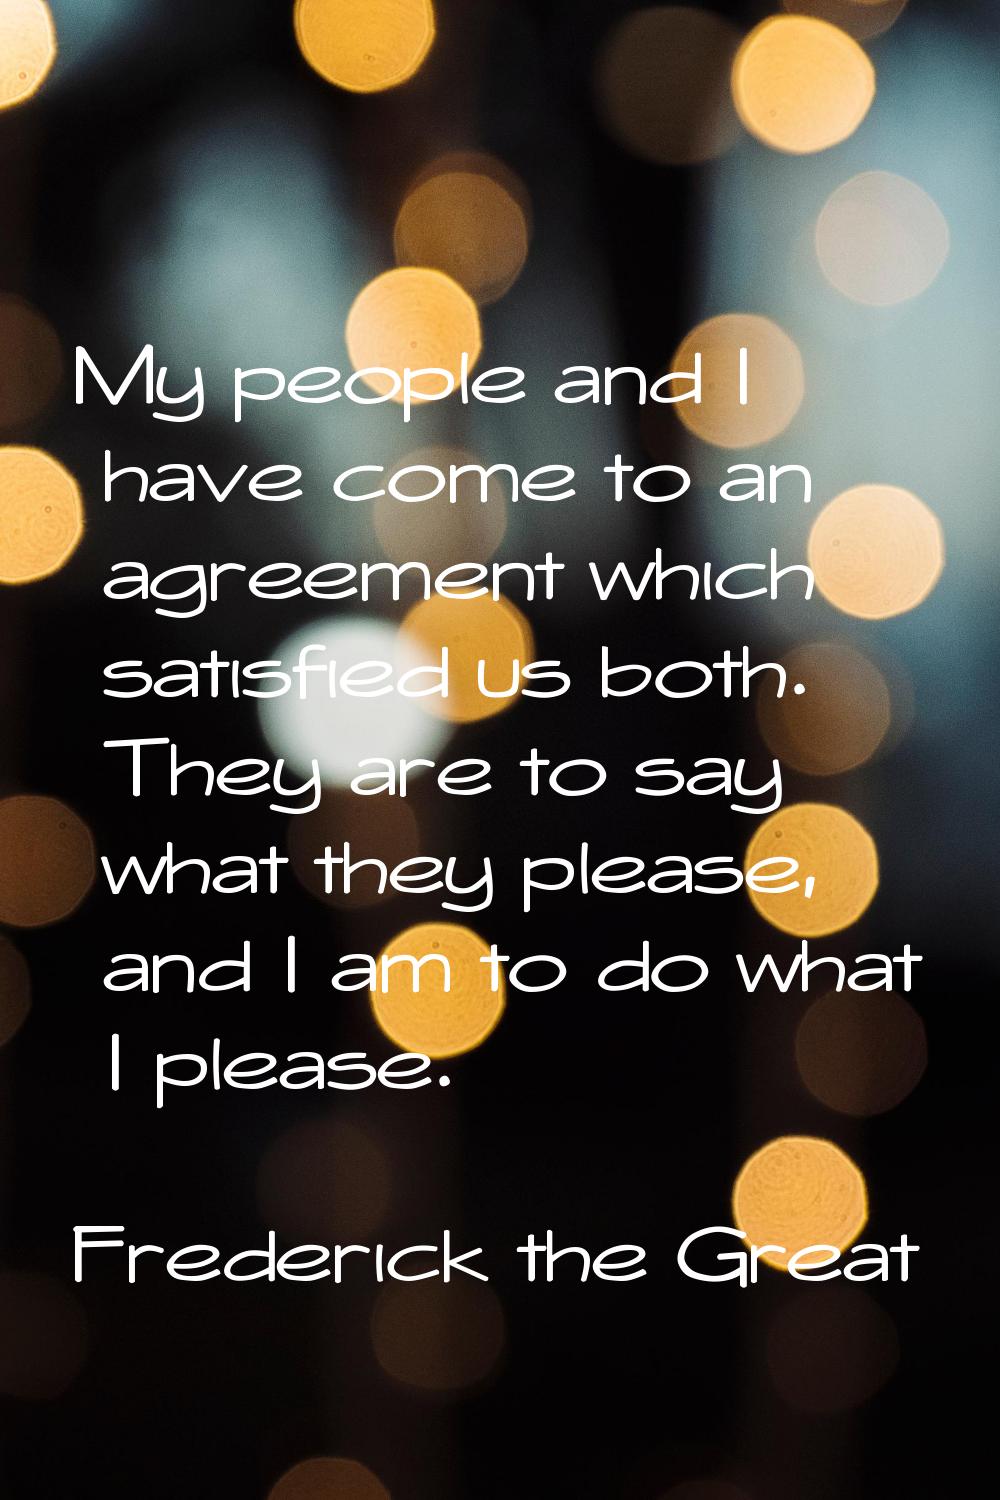 My people and I have come to an agreement which satisfied us both. They are to say what they please